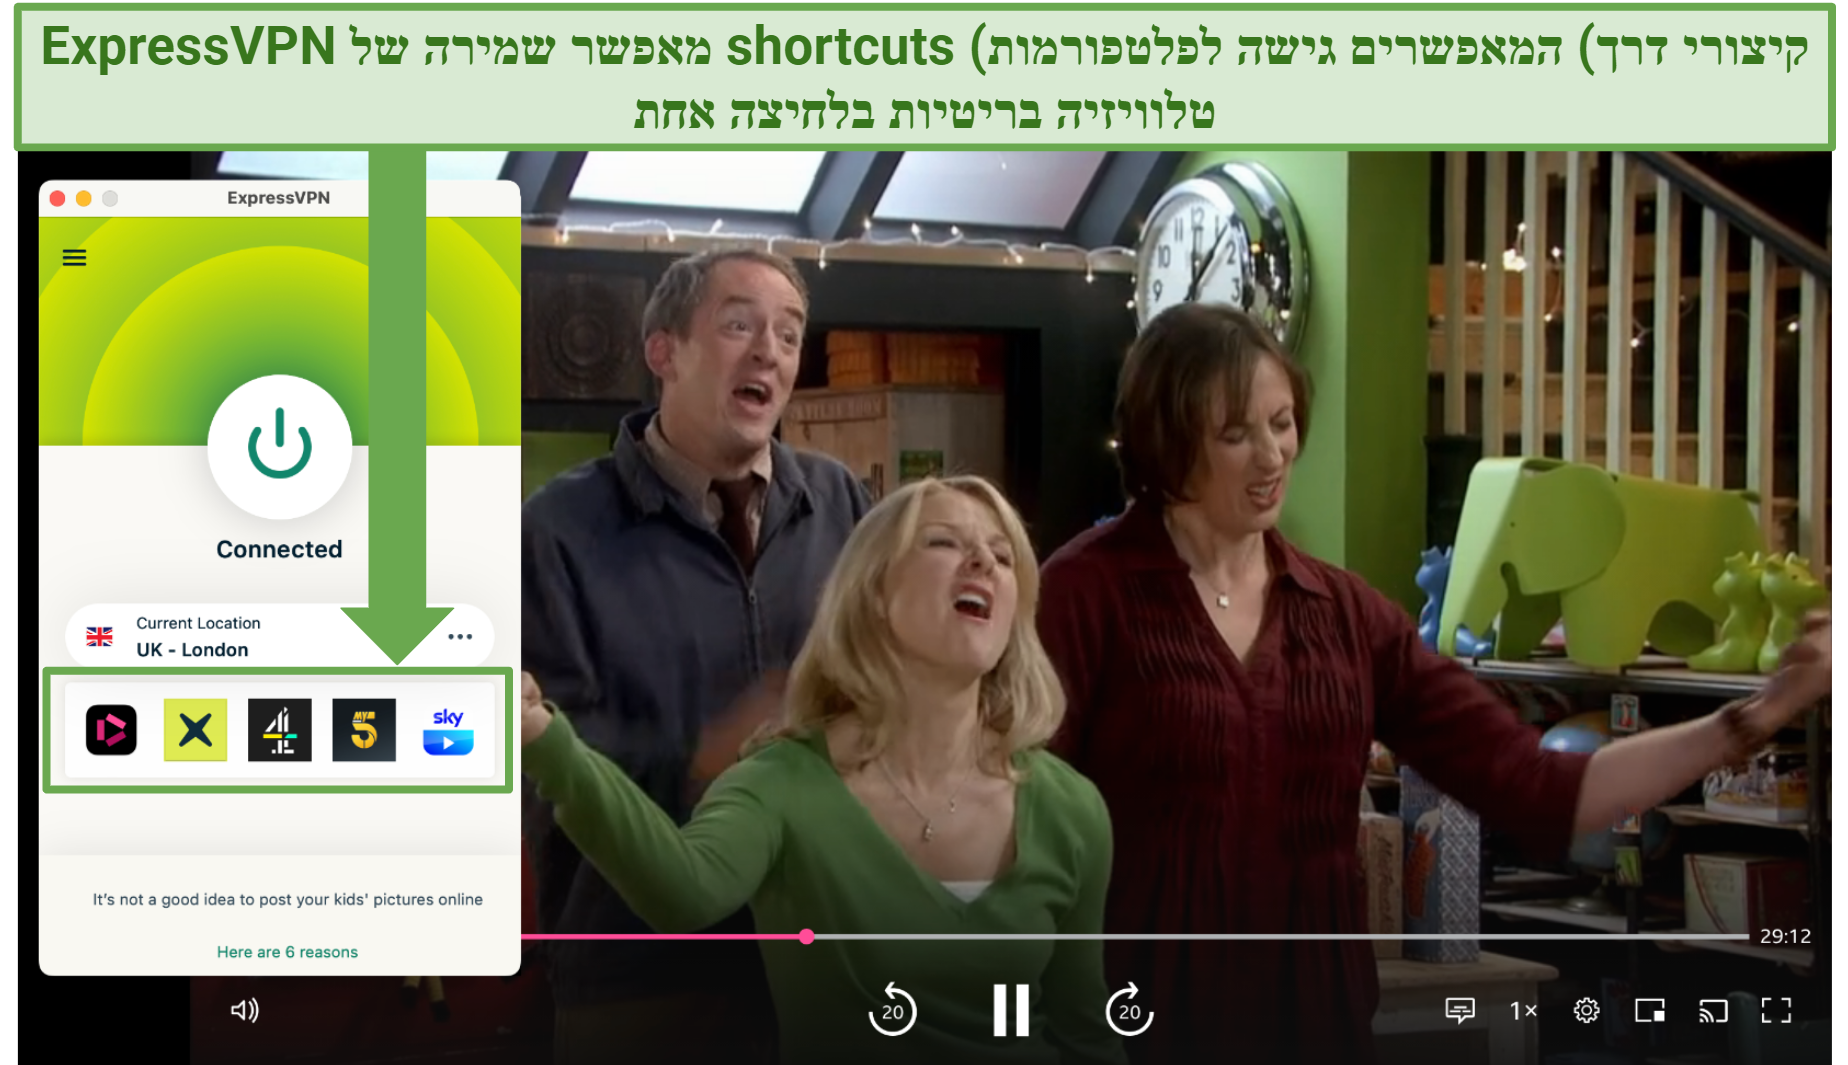 Screenshot showing the ExpressVPN app connected to a UK server over a browser streaming the BBC iPlayer